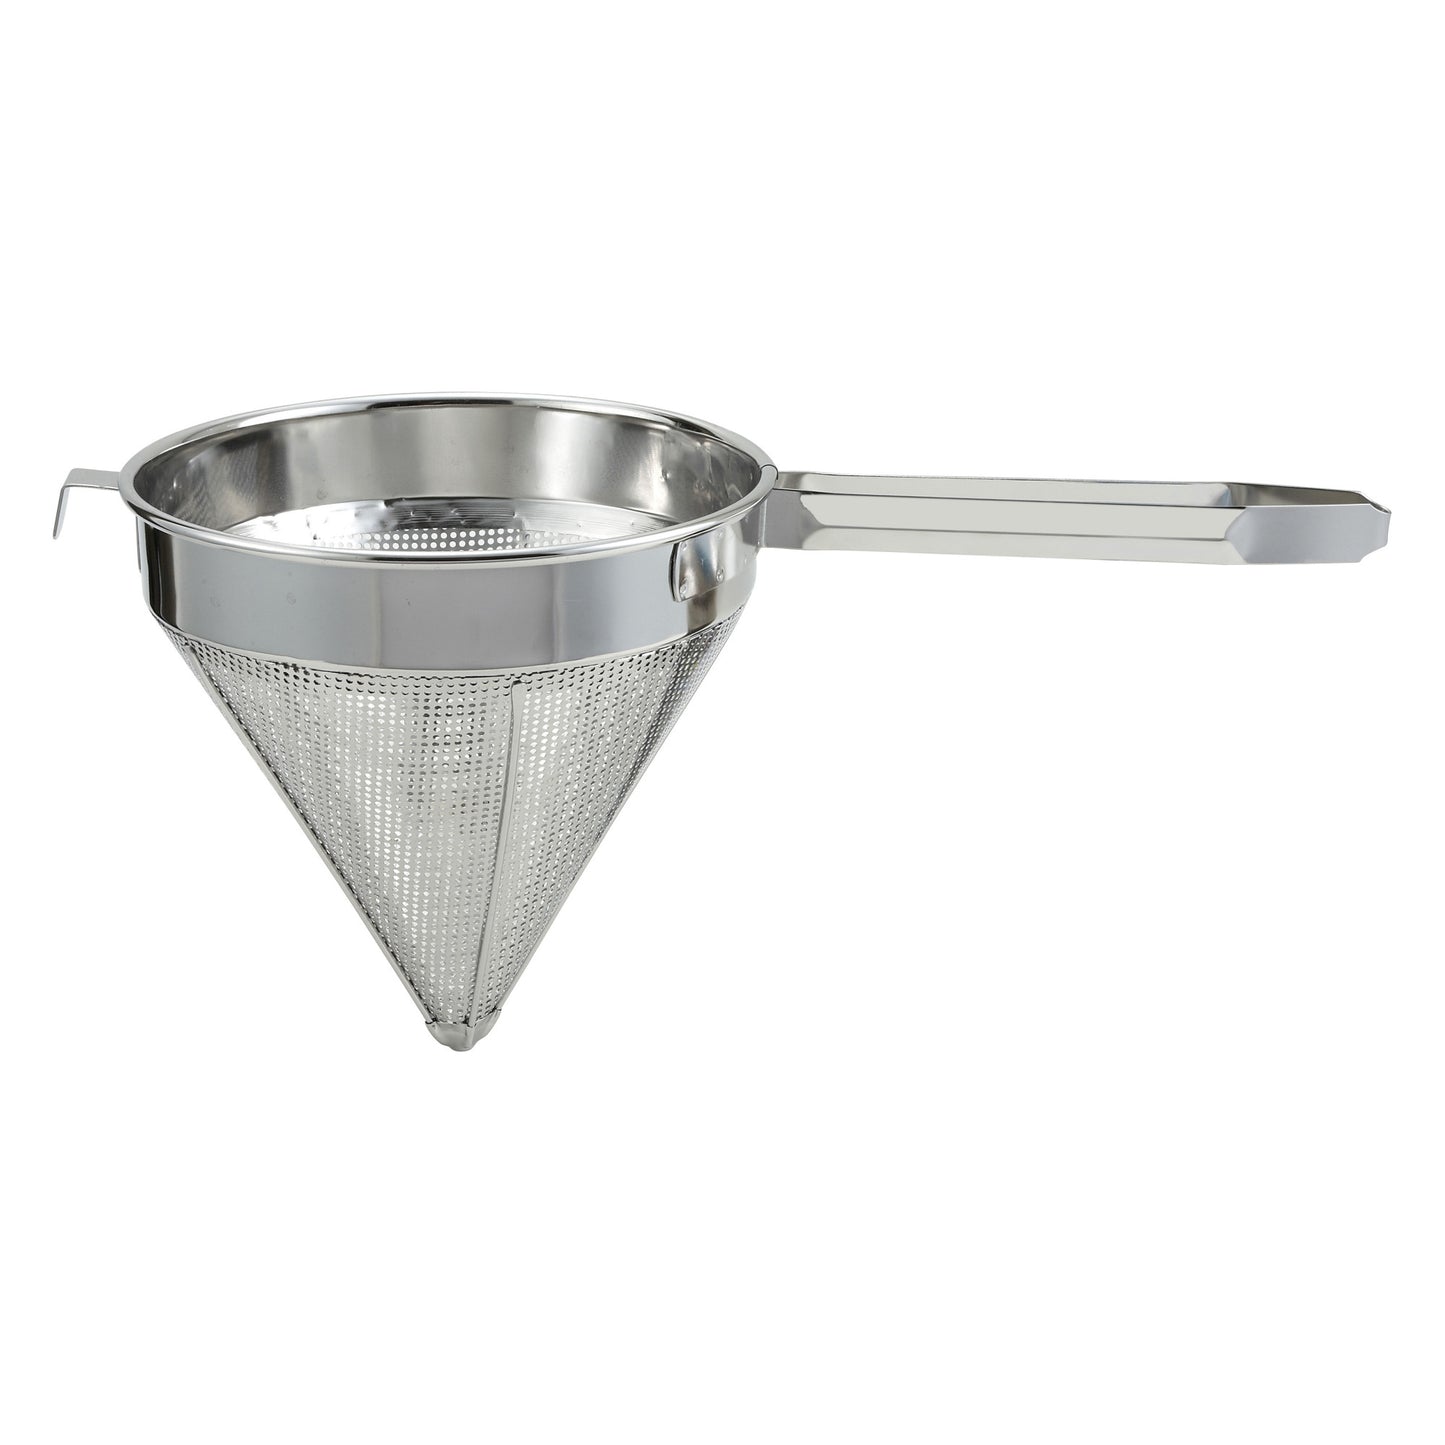 CCS-12C - Stainless Steel China Cap Strainer - 12", Coarse